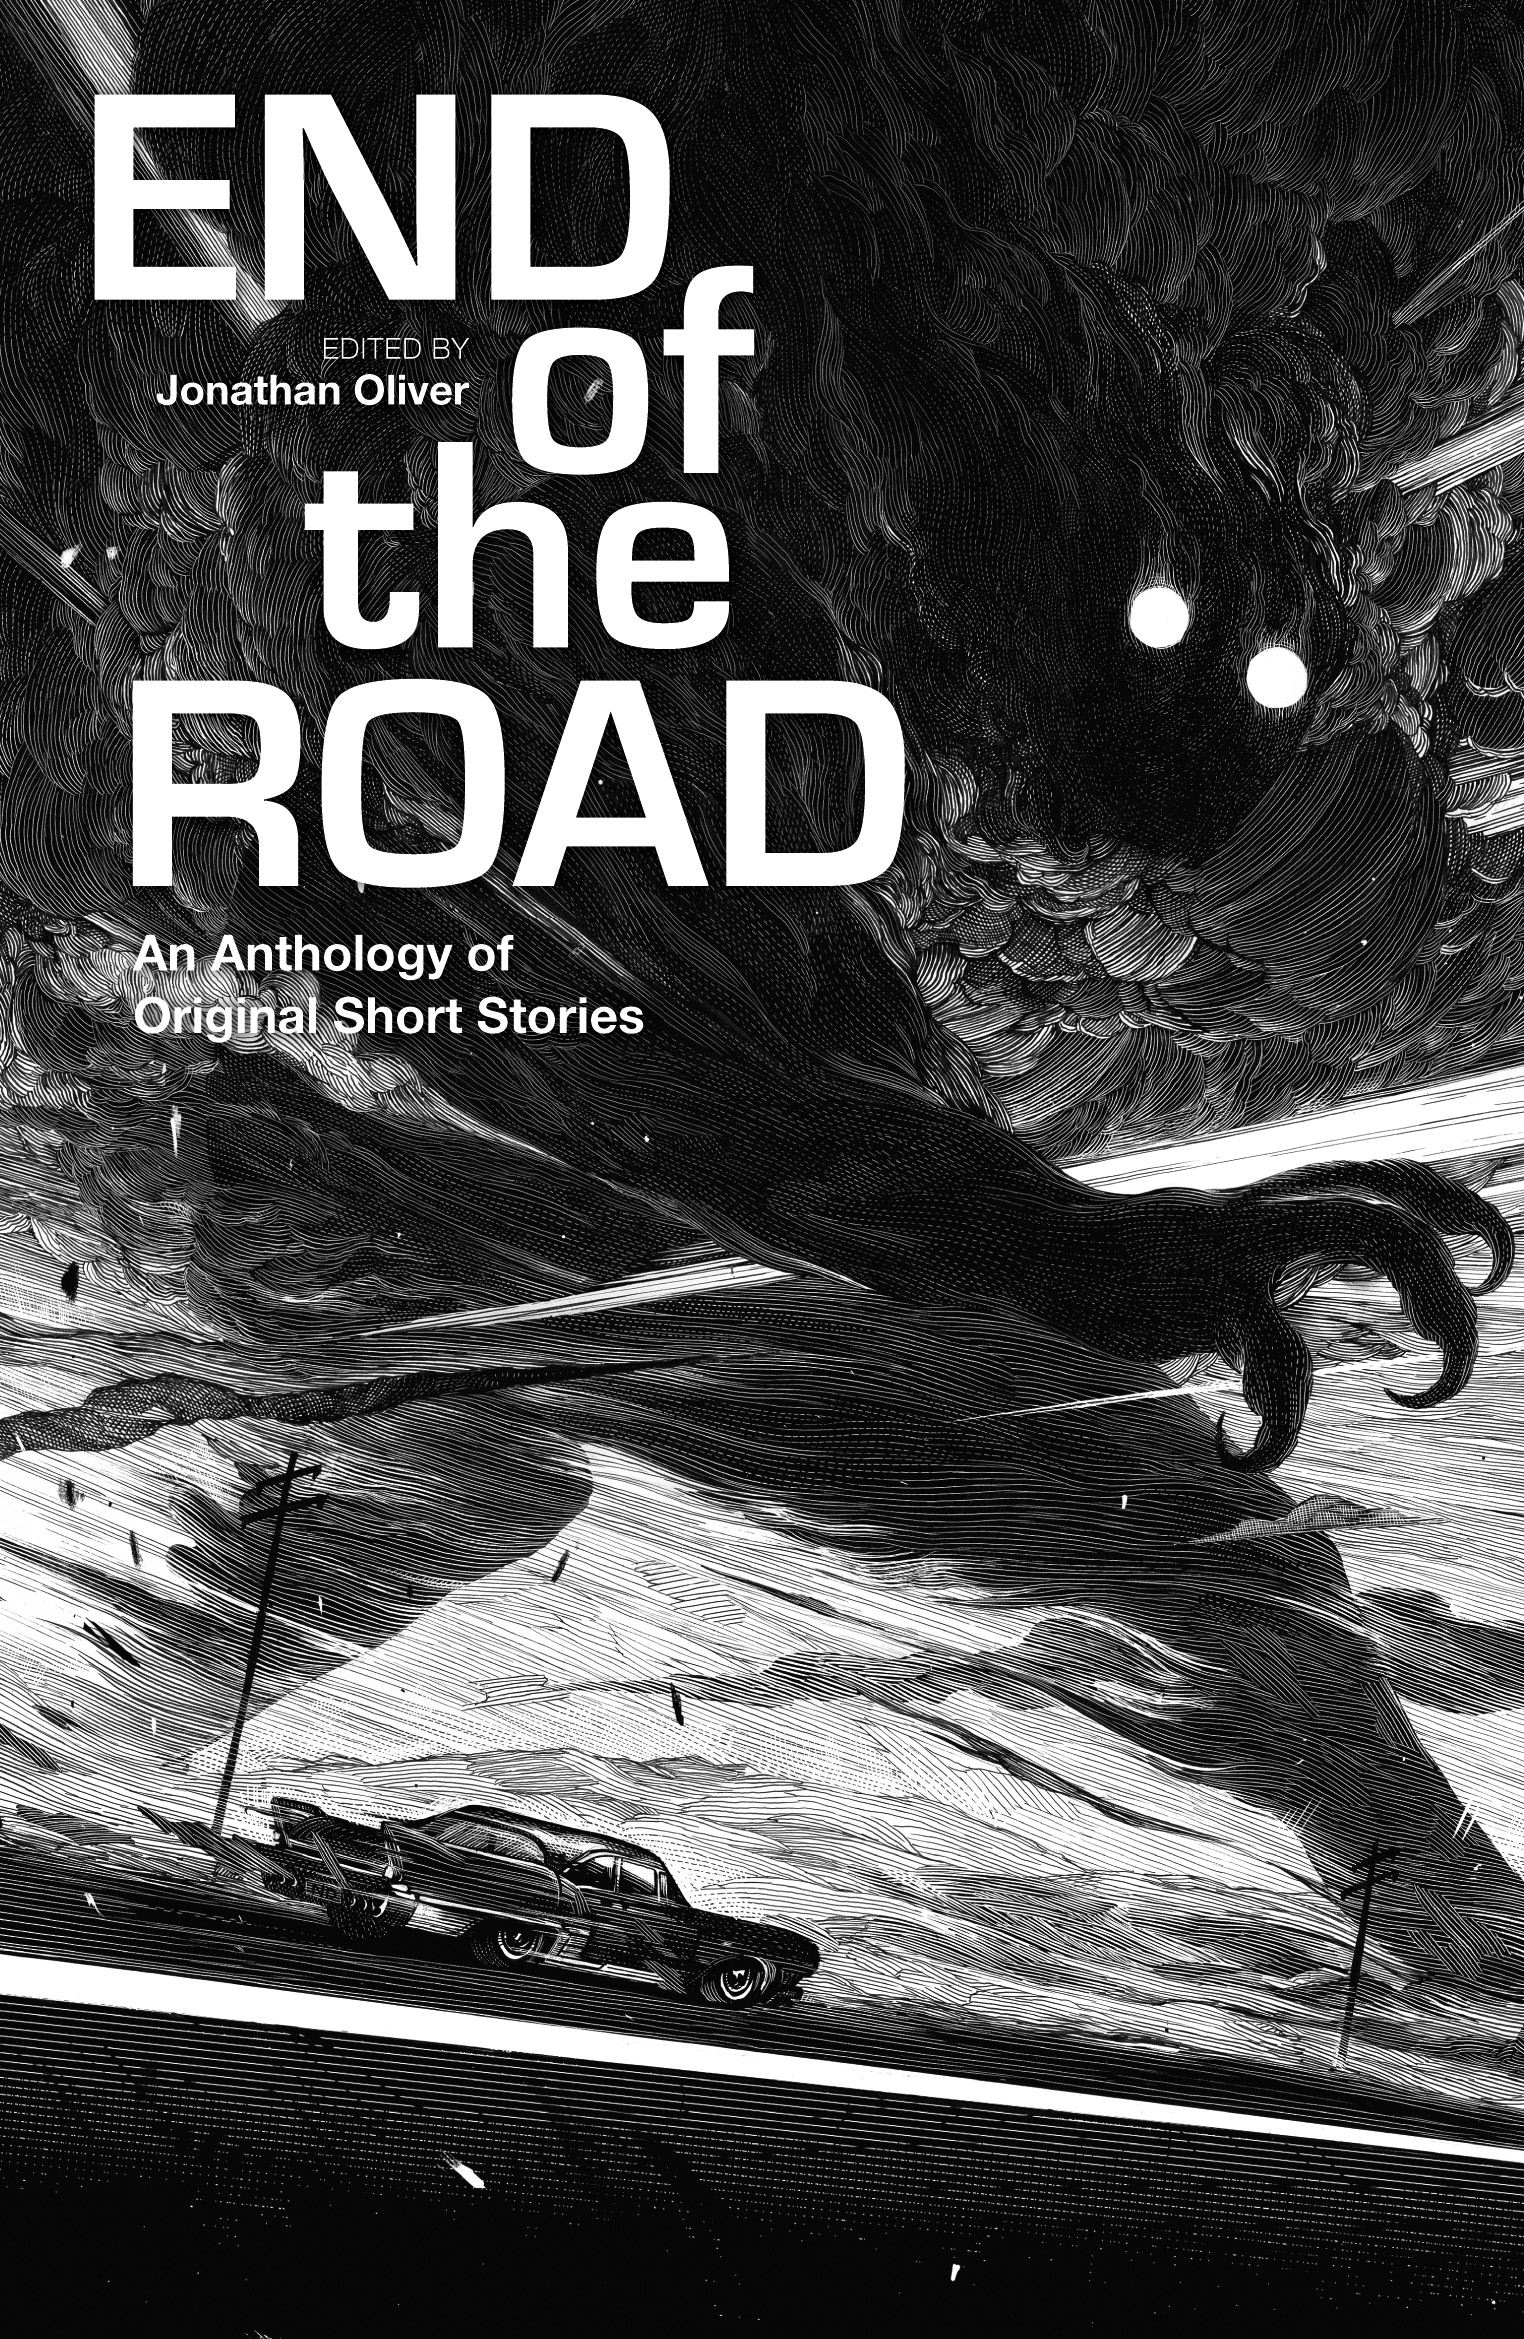 End of the Road: An Anthology of Original Fiction